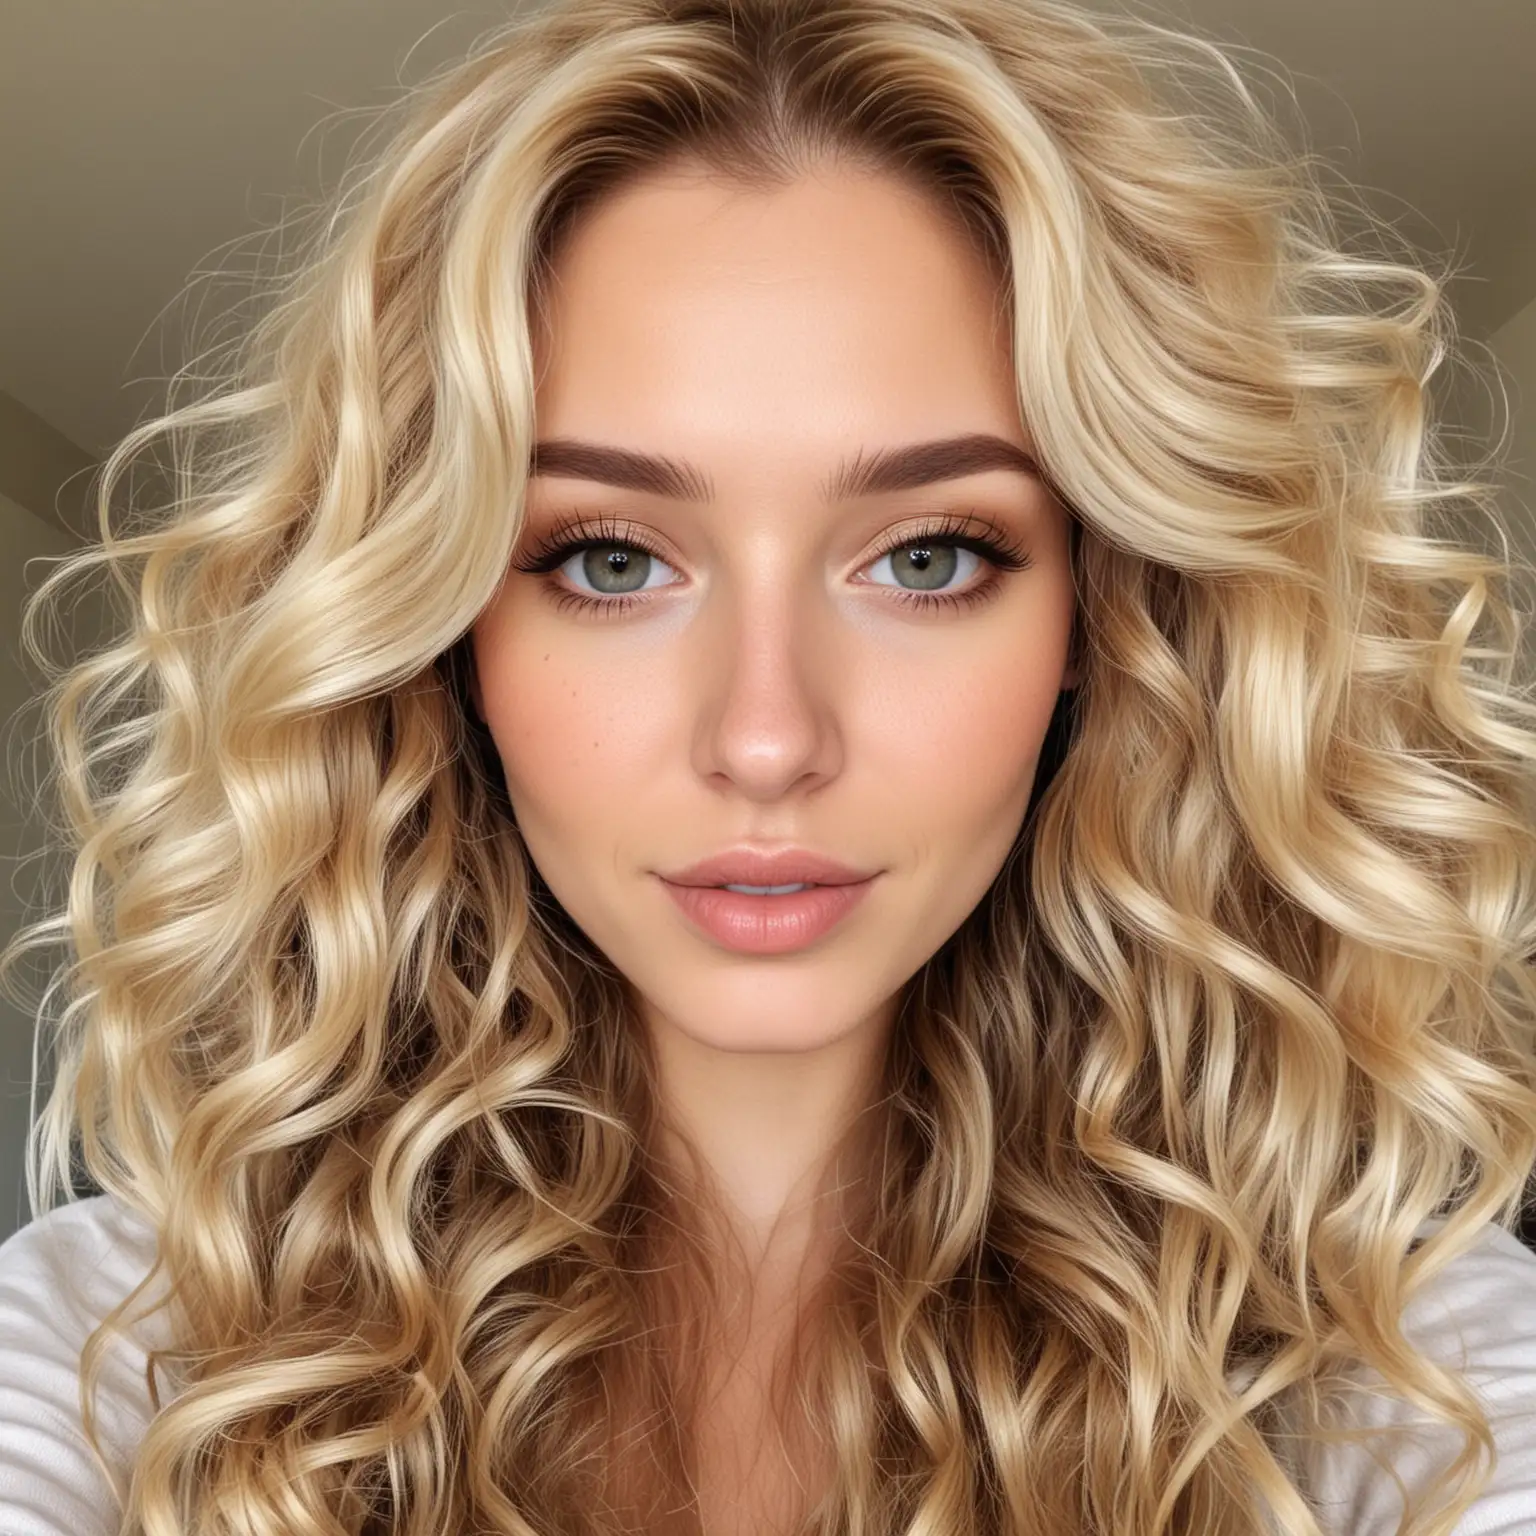 Stunning Blonde Woman Capturing Selfie Moment with Wavy Hair